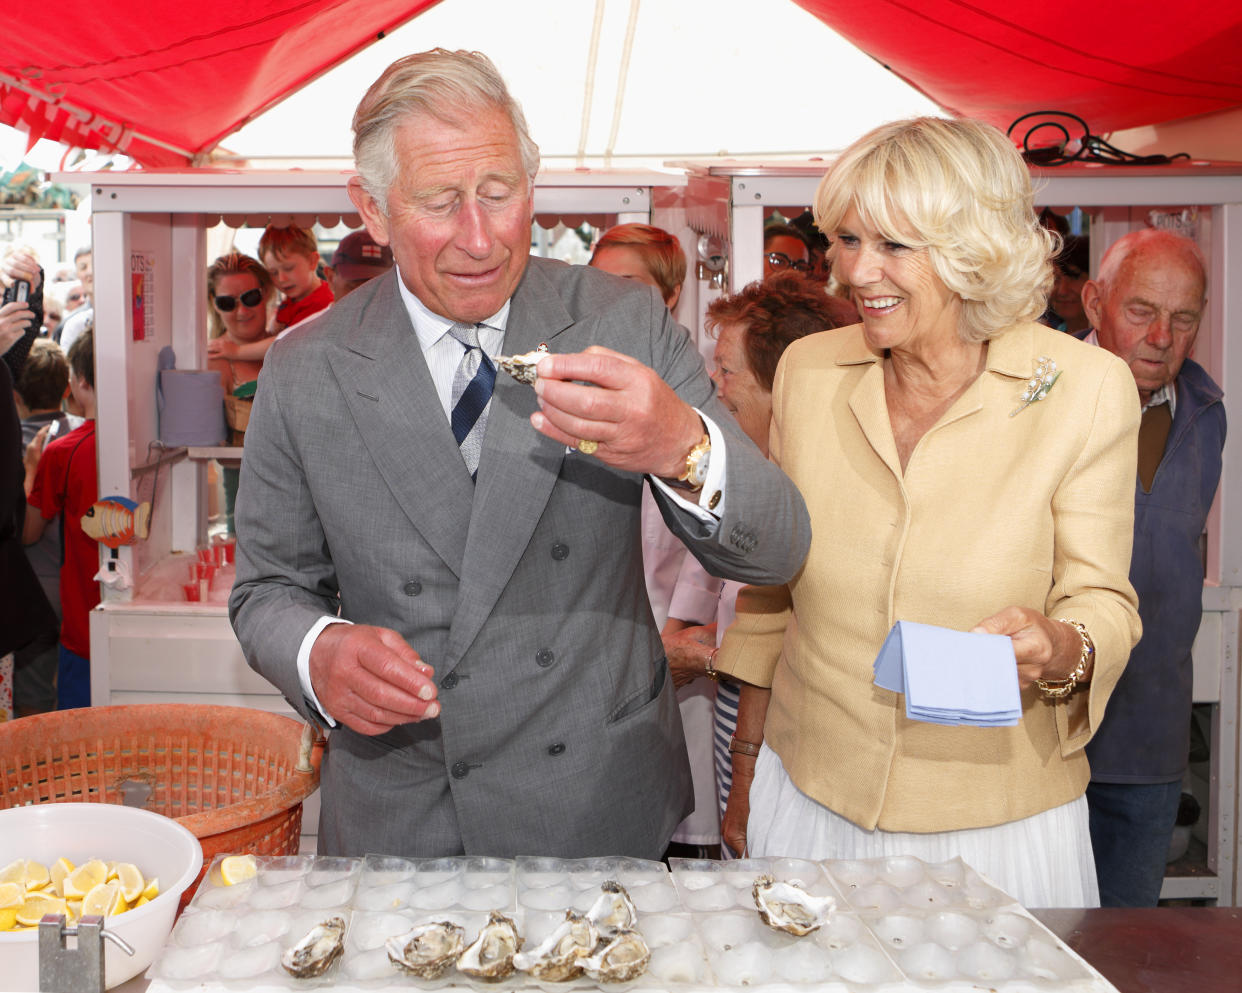 WHITSTABLE, UNITED KINGDOM - JULY 29: (EMBARGOED FOR PUBLICATION IN UK NEWSPAPERS UNTIL 48 HOURS AFTER CREATE DATE AND TIME) Prince Charles, Prince of Wales eats an oyster as Camilla, Duchess of Cornwall looks on during their visit to the Whitstable Oyster Festival on July 29, 2013 in Whitstable, England. (Photo by Max Mumby/Indigo/Getty Images)